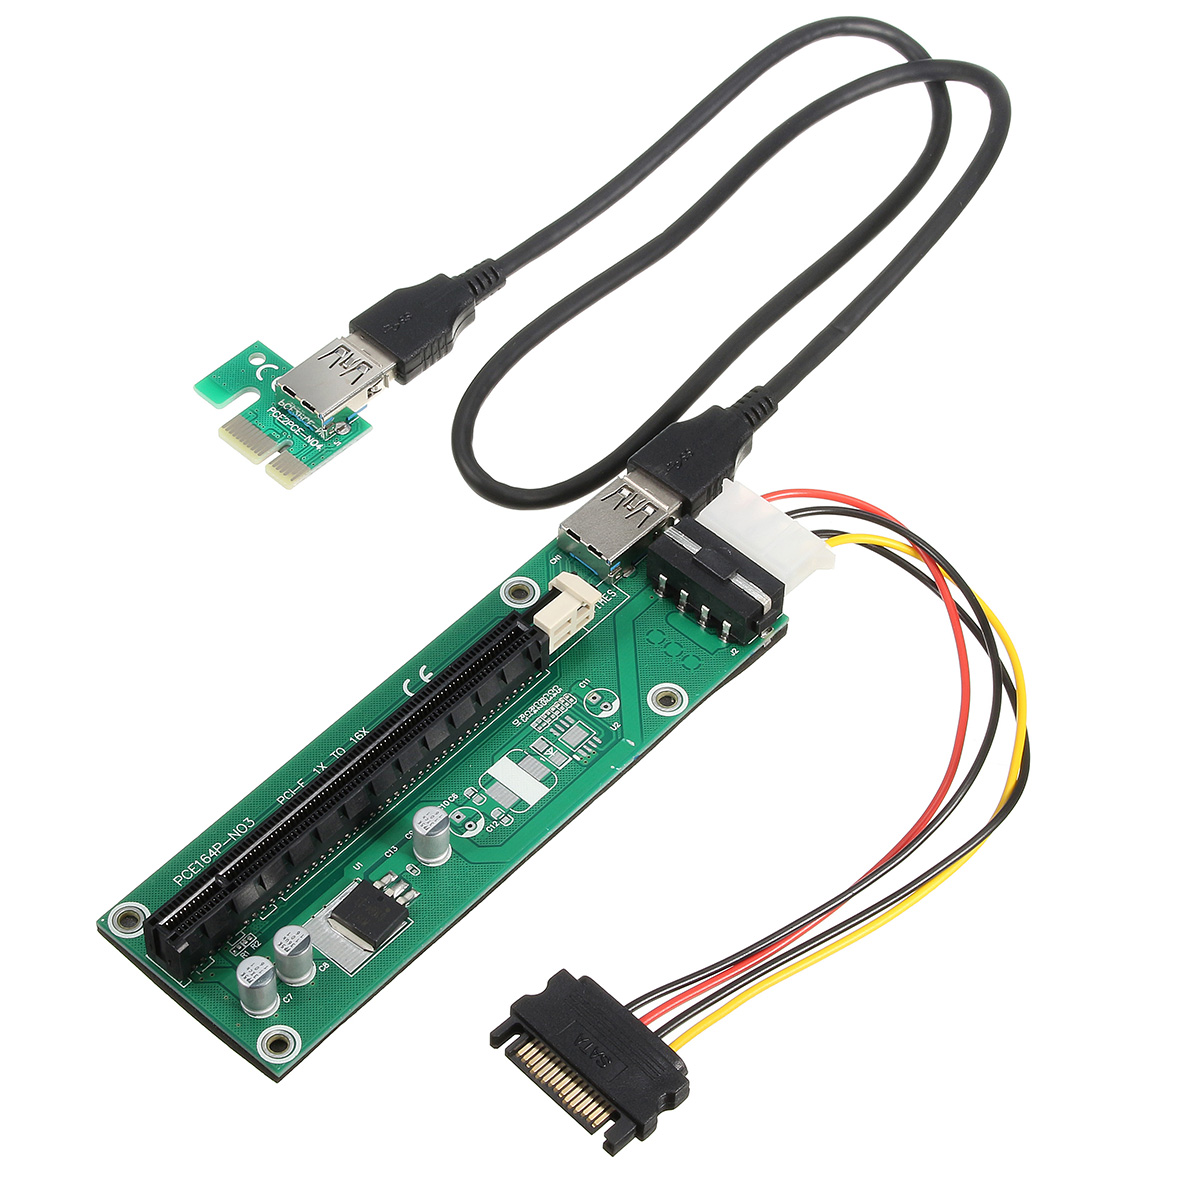 USB 3.0 PCI-E Express 1x to16x Extension Cable Extender Riser Board Card Adapter SATA Cable